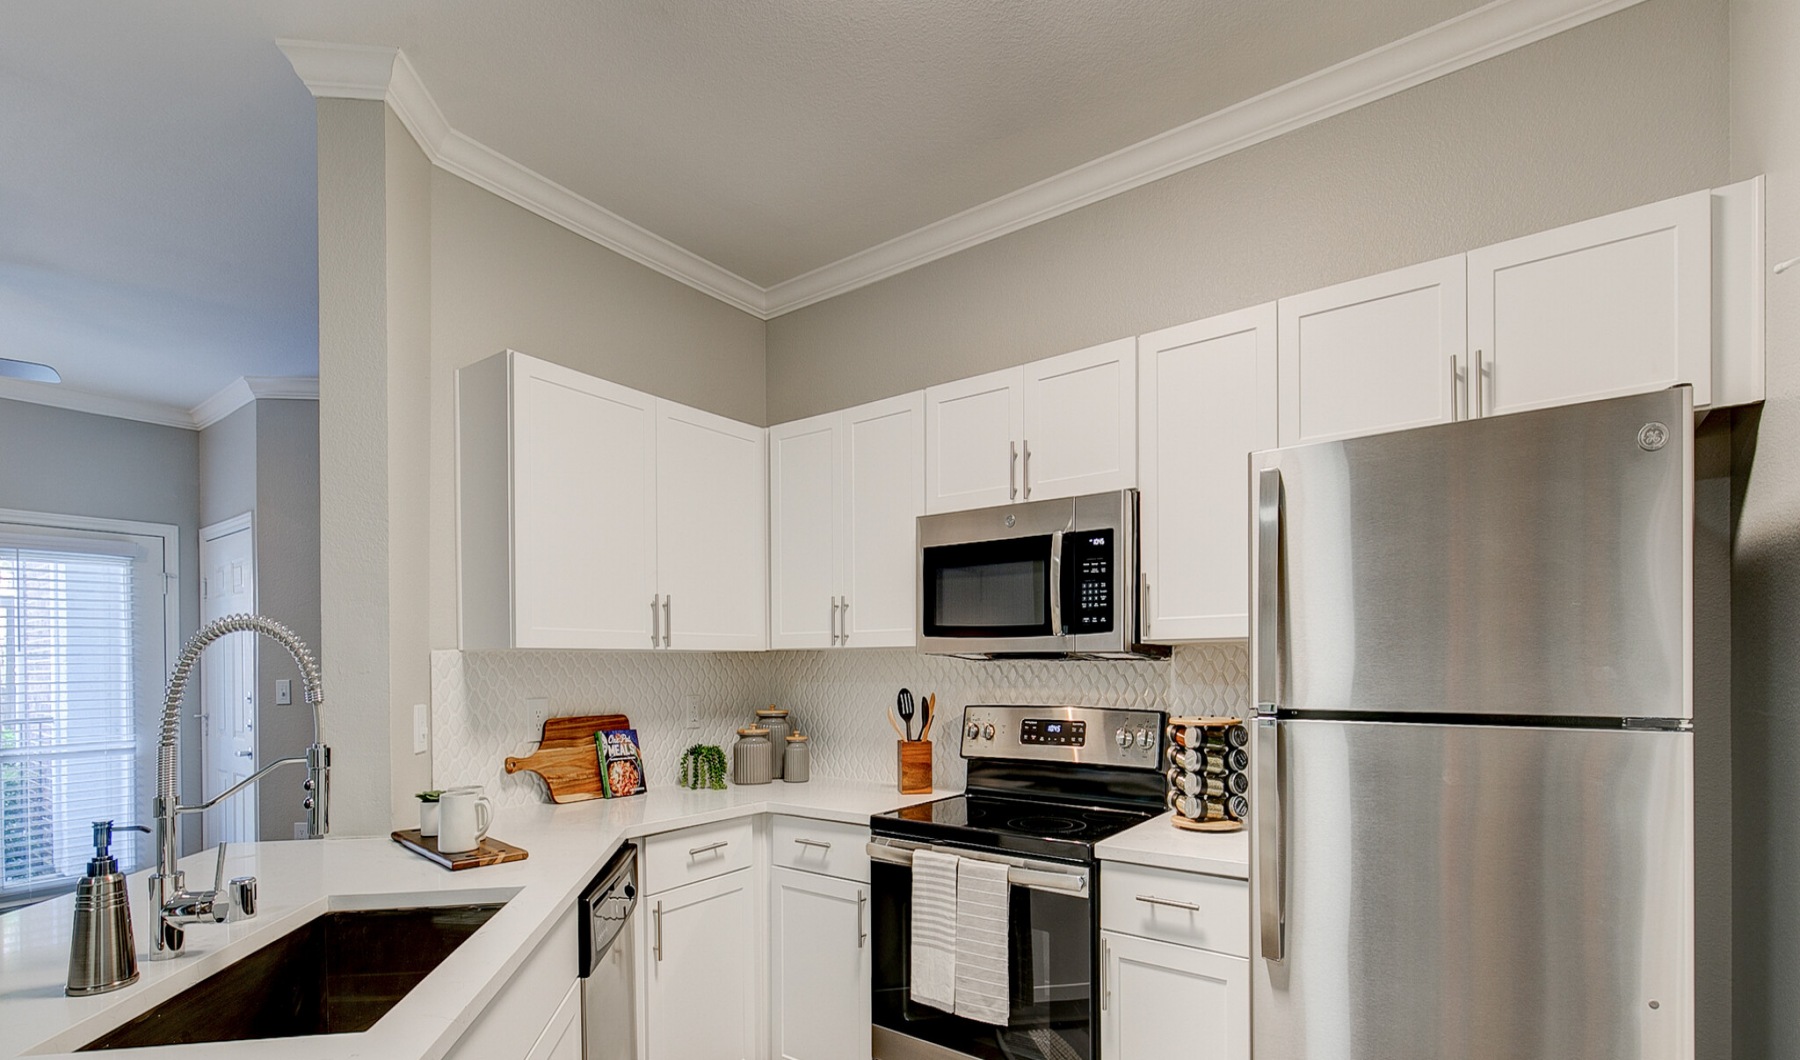 Model kitchen at our apartments in Flower Mound, featuring stainless steel appliances and wood grain floor paneling.